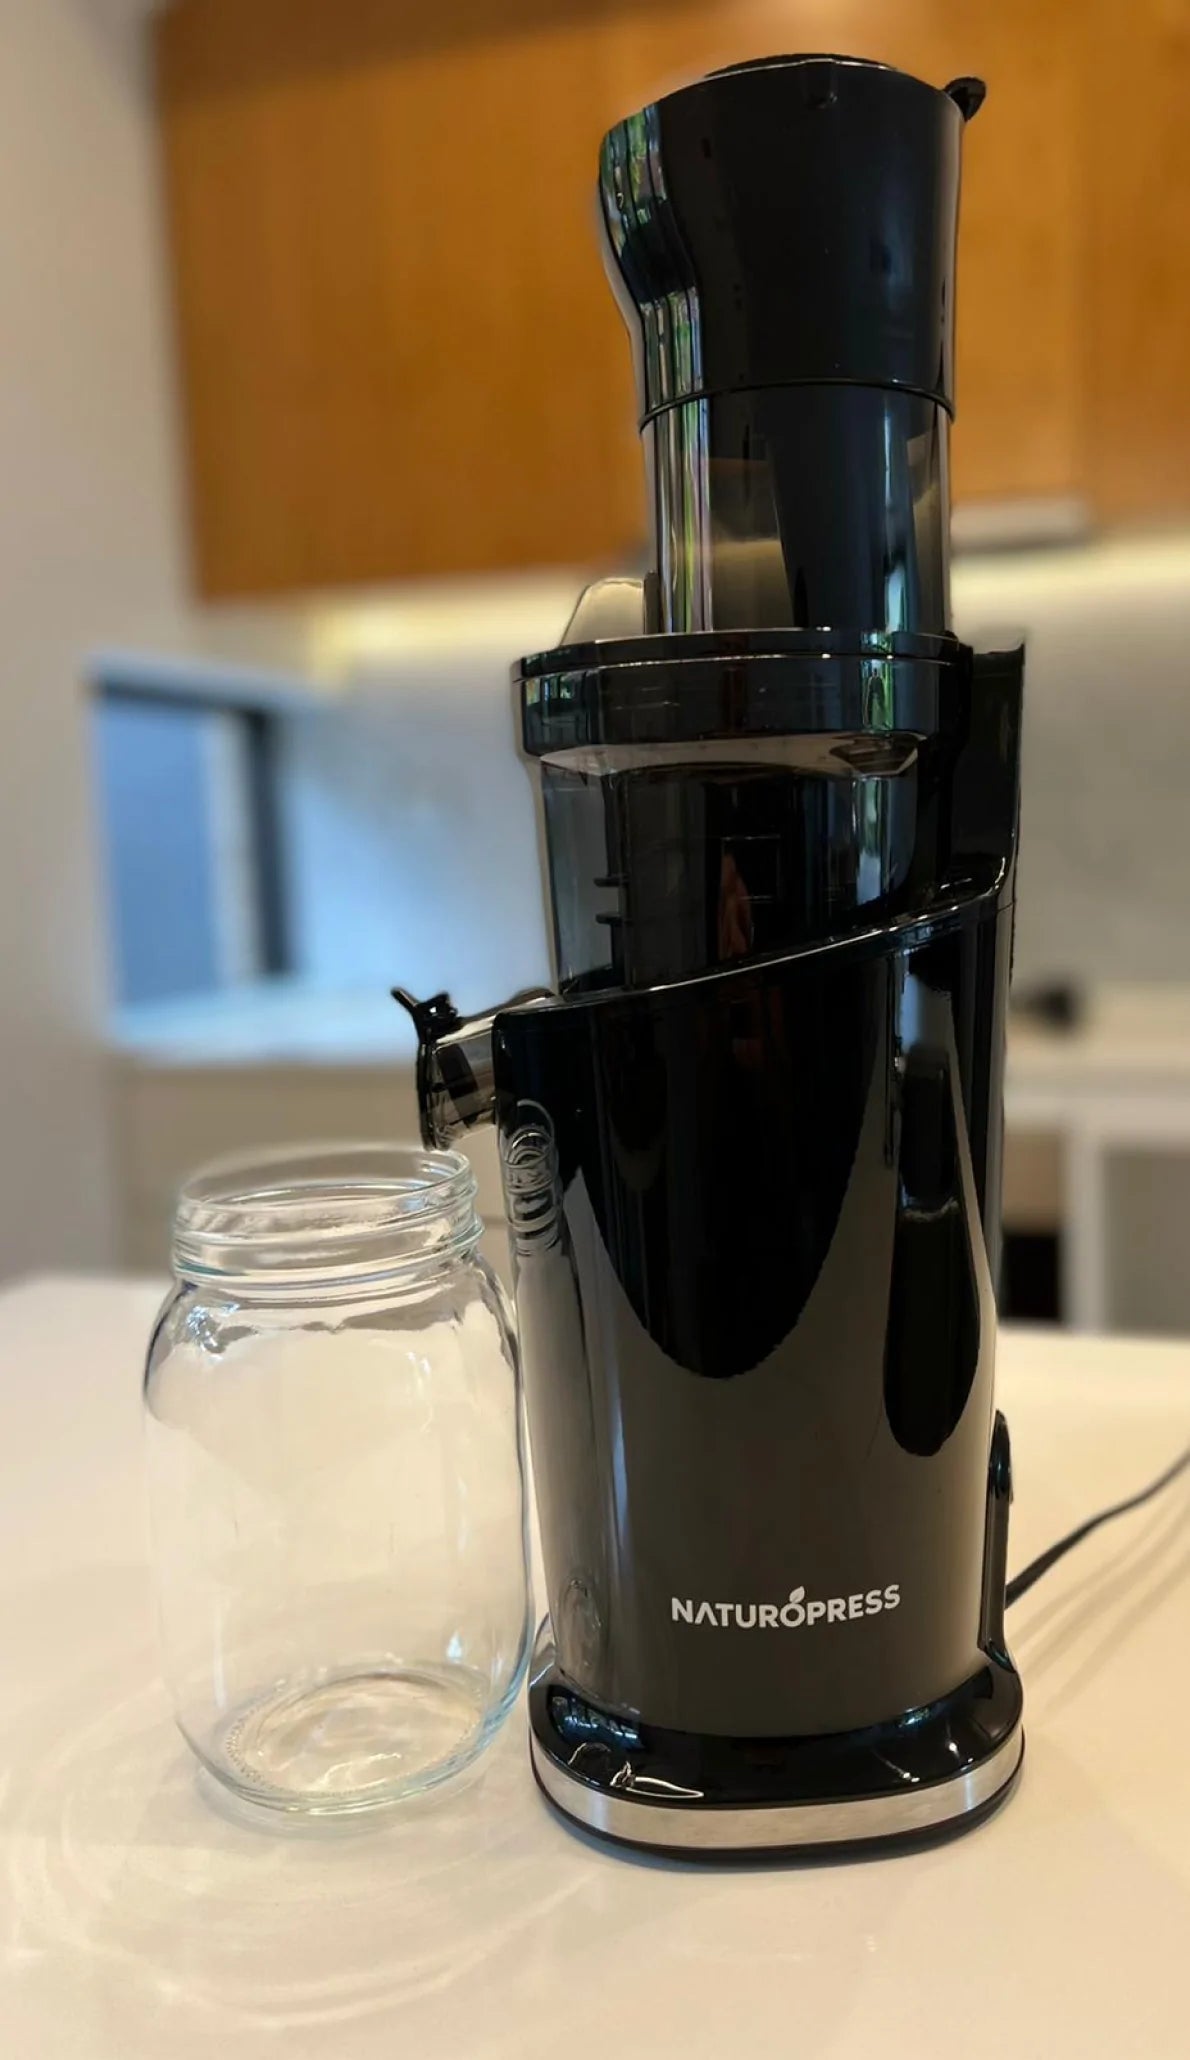 Cold Pressed Juicer vs Centrifugal Juicer - Which Is Better